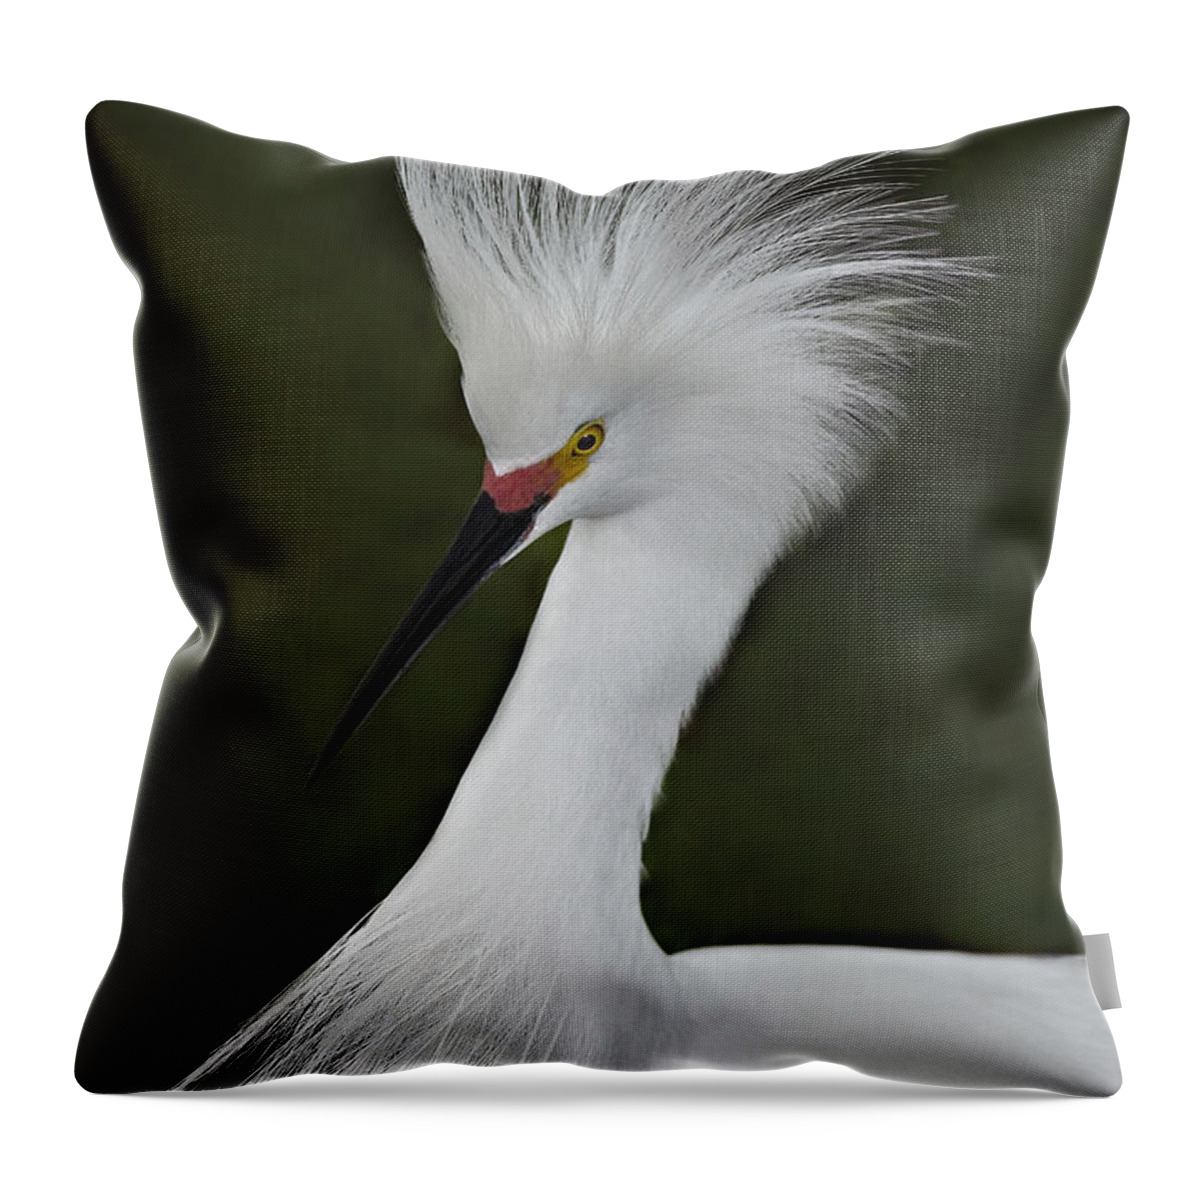 Snowy Egret Throw Pillow featuring the photograph Snowy Egret Display by Susan Candelario